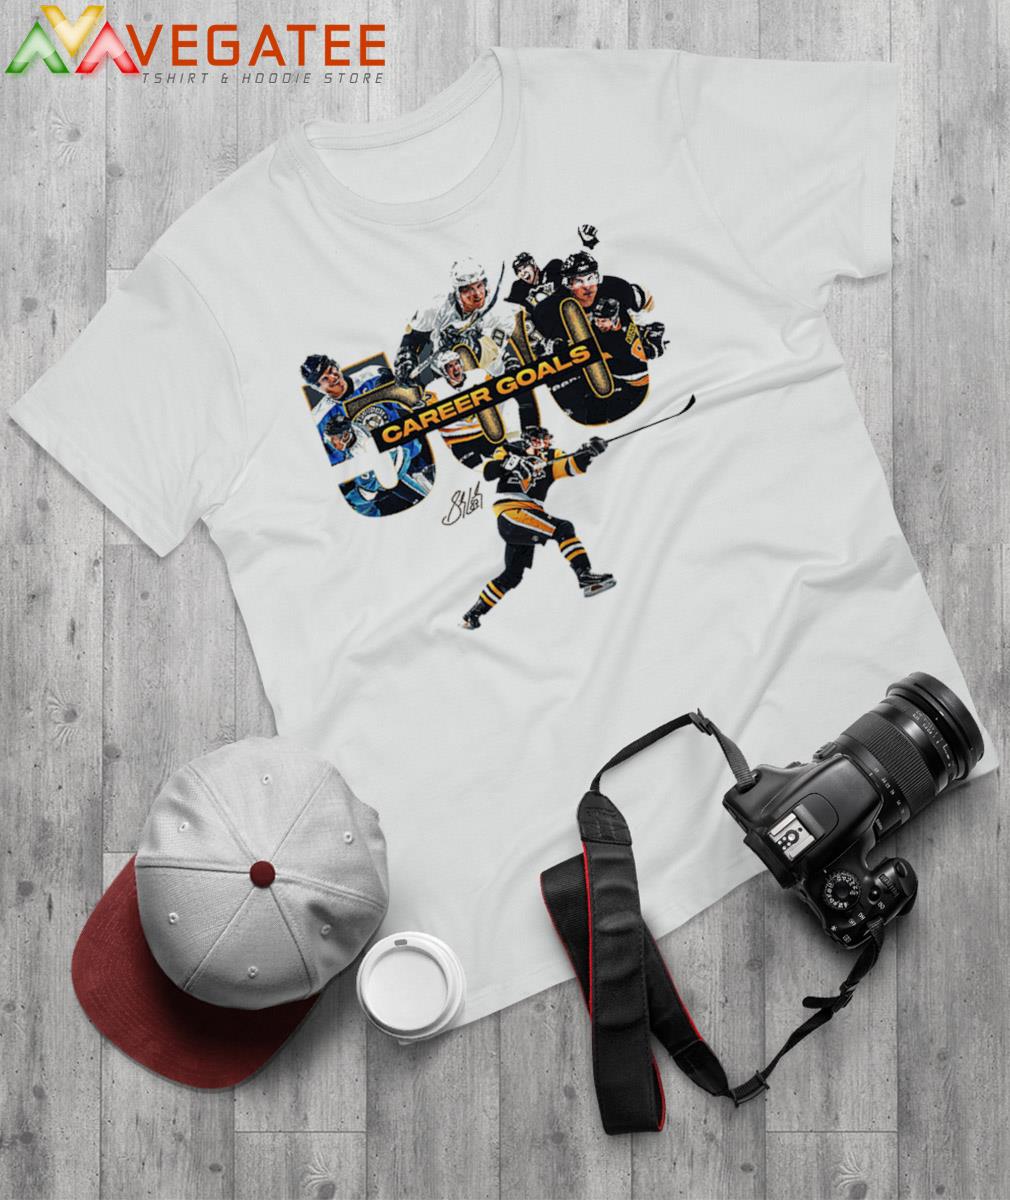 Sidney Crosby T-Shirts for Sale